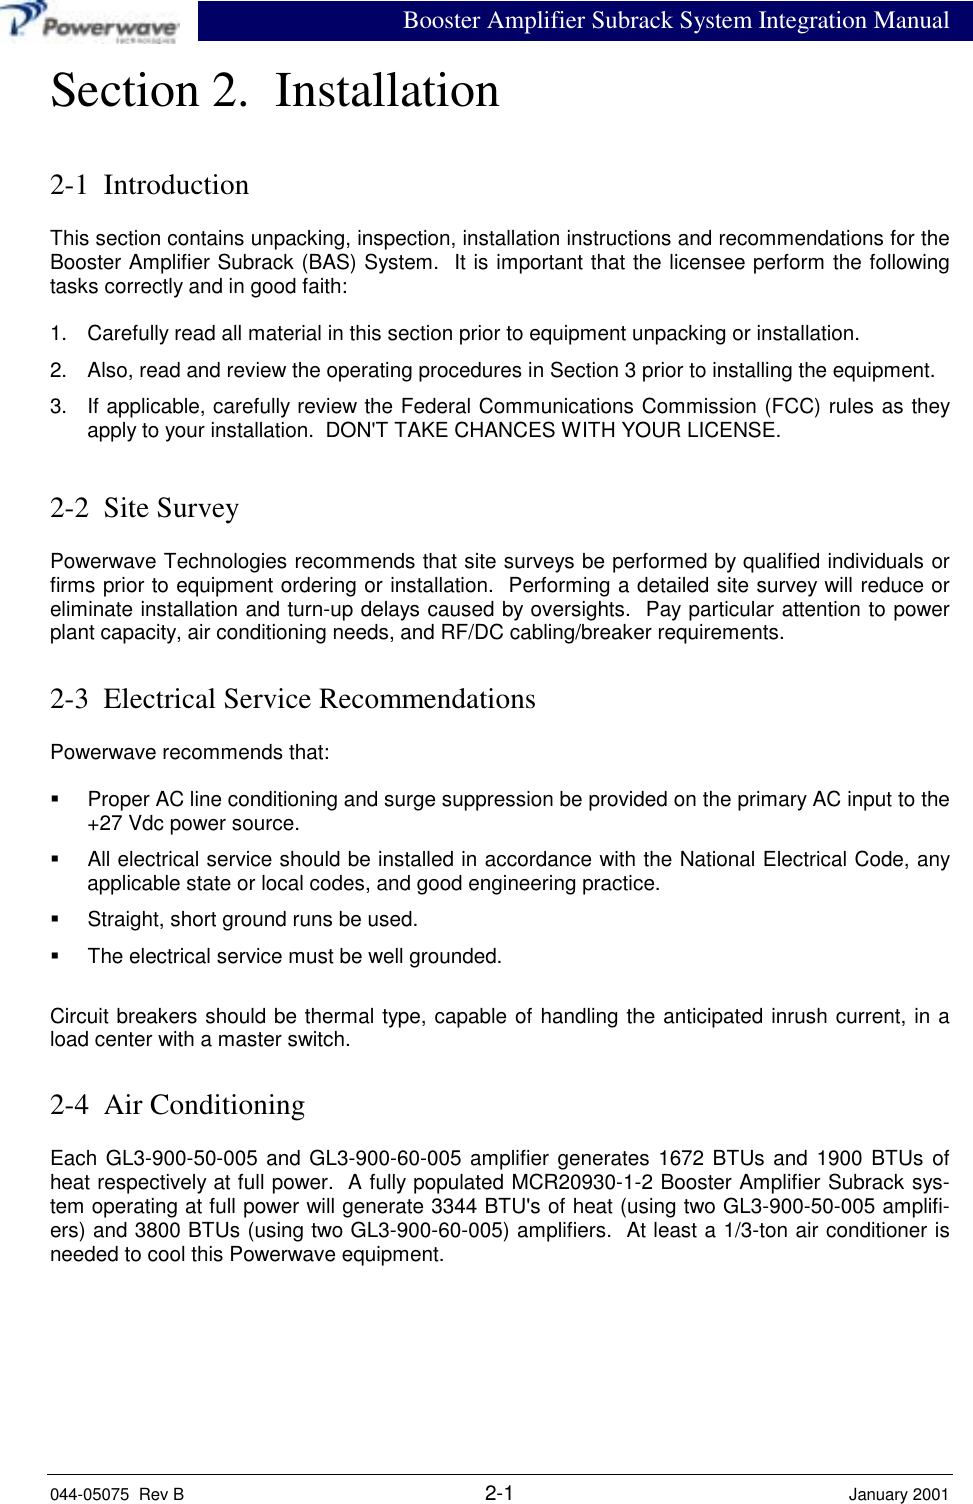 Booster Amplifier Subrack System Integration Manual044-05075  Rev B 2-1 January 2001Section 2.  Installation2-1  IntroductionThis section contains unpacking, inspection, installation instructions and recommendations for theBooster Amplifier Subrack (BAS) System.  It is important that the licensee perform the followingtasks correctly and in good faith:1.  Carefully read all material in this section prior to equipment unpacking or installation.2.  Also, read and review the operating procedures in Section 3 prior to installing the equipment.3.  If applicable, carefully review the Federal Communications Commission (FCC) rules as theyapply to your installation.  DON&apos;T TAKE CHANCES WITH YOUR LICENSE.2-2  Site SurveyPowerwave Technologies recommends that site surveys be performed by qualified individuals orfirms prior to equipment ordering or installation.  Performing a detailed site survey will reduce oreliminate installation and turn-up delays caused by oversights.  Pay particular attention to powerplant capacity, air conditioning needs, and RF/DC cabling/breaker requirements.2-3  Electrical Service RecommendationsPowerwave recommends that:!  Proper AC line conditioning and surge suppression be provided on the primary AC input to the+27 Vdc power source.!  All electrical service should be installed in accordance with the National Electrical Code, anyapplicable state or local codes, and good engineering practice.!  Straight, short ground runs be used.!  The electrical service must be well grounded.Circuit breakers should be thermal type, capable of handling the anticipated inrush current, in aload center with a master switch.2-4  Air ConditioningEach GL3-900-50-005 and GL3-900-60-005 amplifier generates 1672 BTUs and 1900 BTUs ofheat respectively at full power.  A fully populated MCR20930-1-2 Booster Amplifier Subrack sys-tem operating at full power will generate 3344 BTU&apos;s of heat (using two GL3-900-50-005 amplifi-ers) and 3800 BTUs (using two GL3-900-60-005) amplifiers.  At least a 1/3-ton air conditioner isneeded to cool this Powerwave equipment.